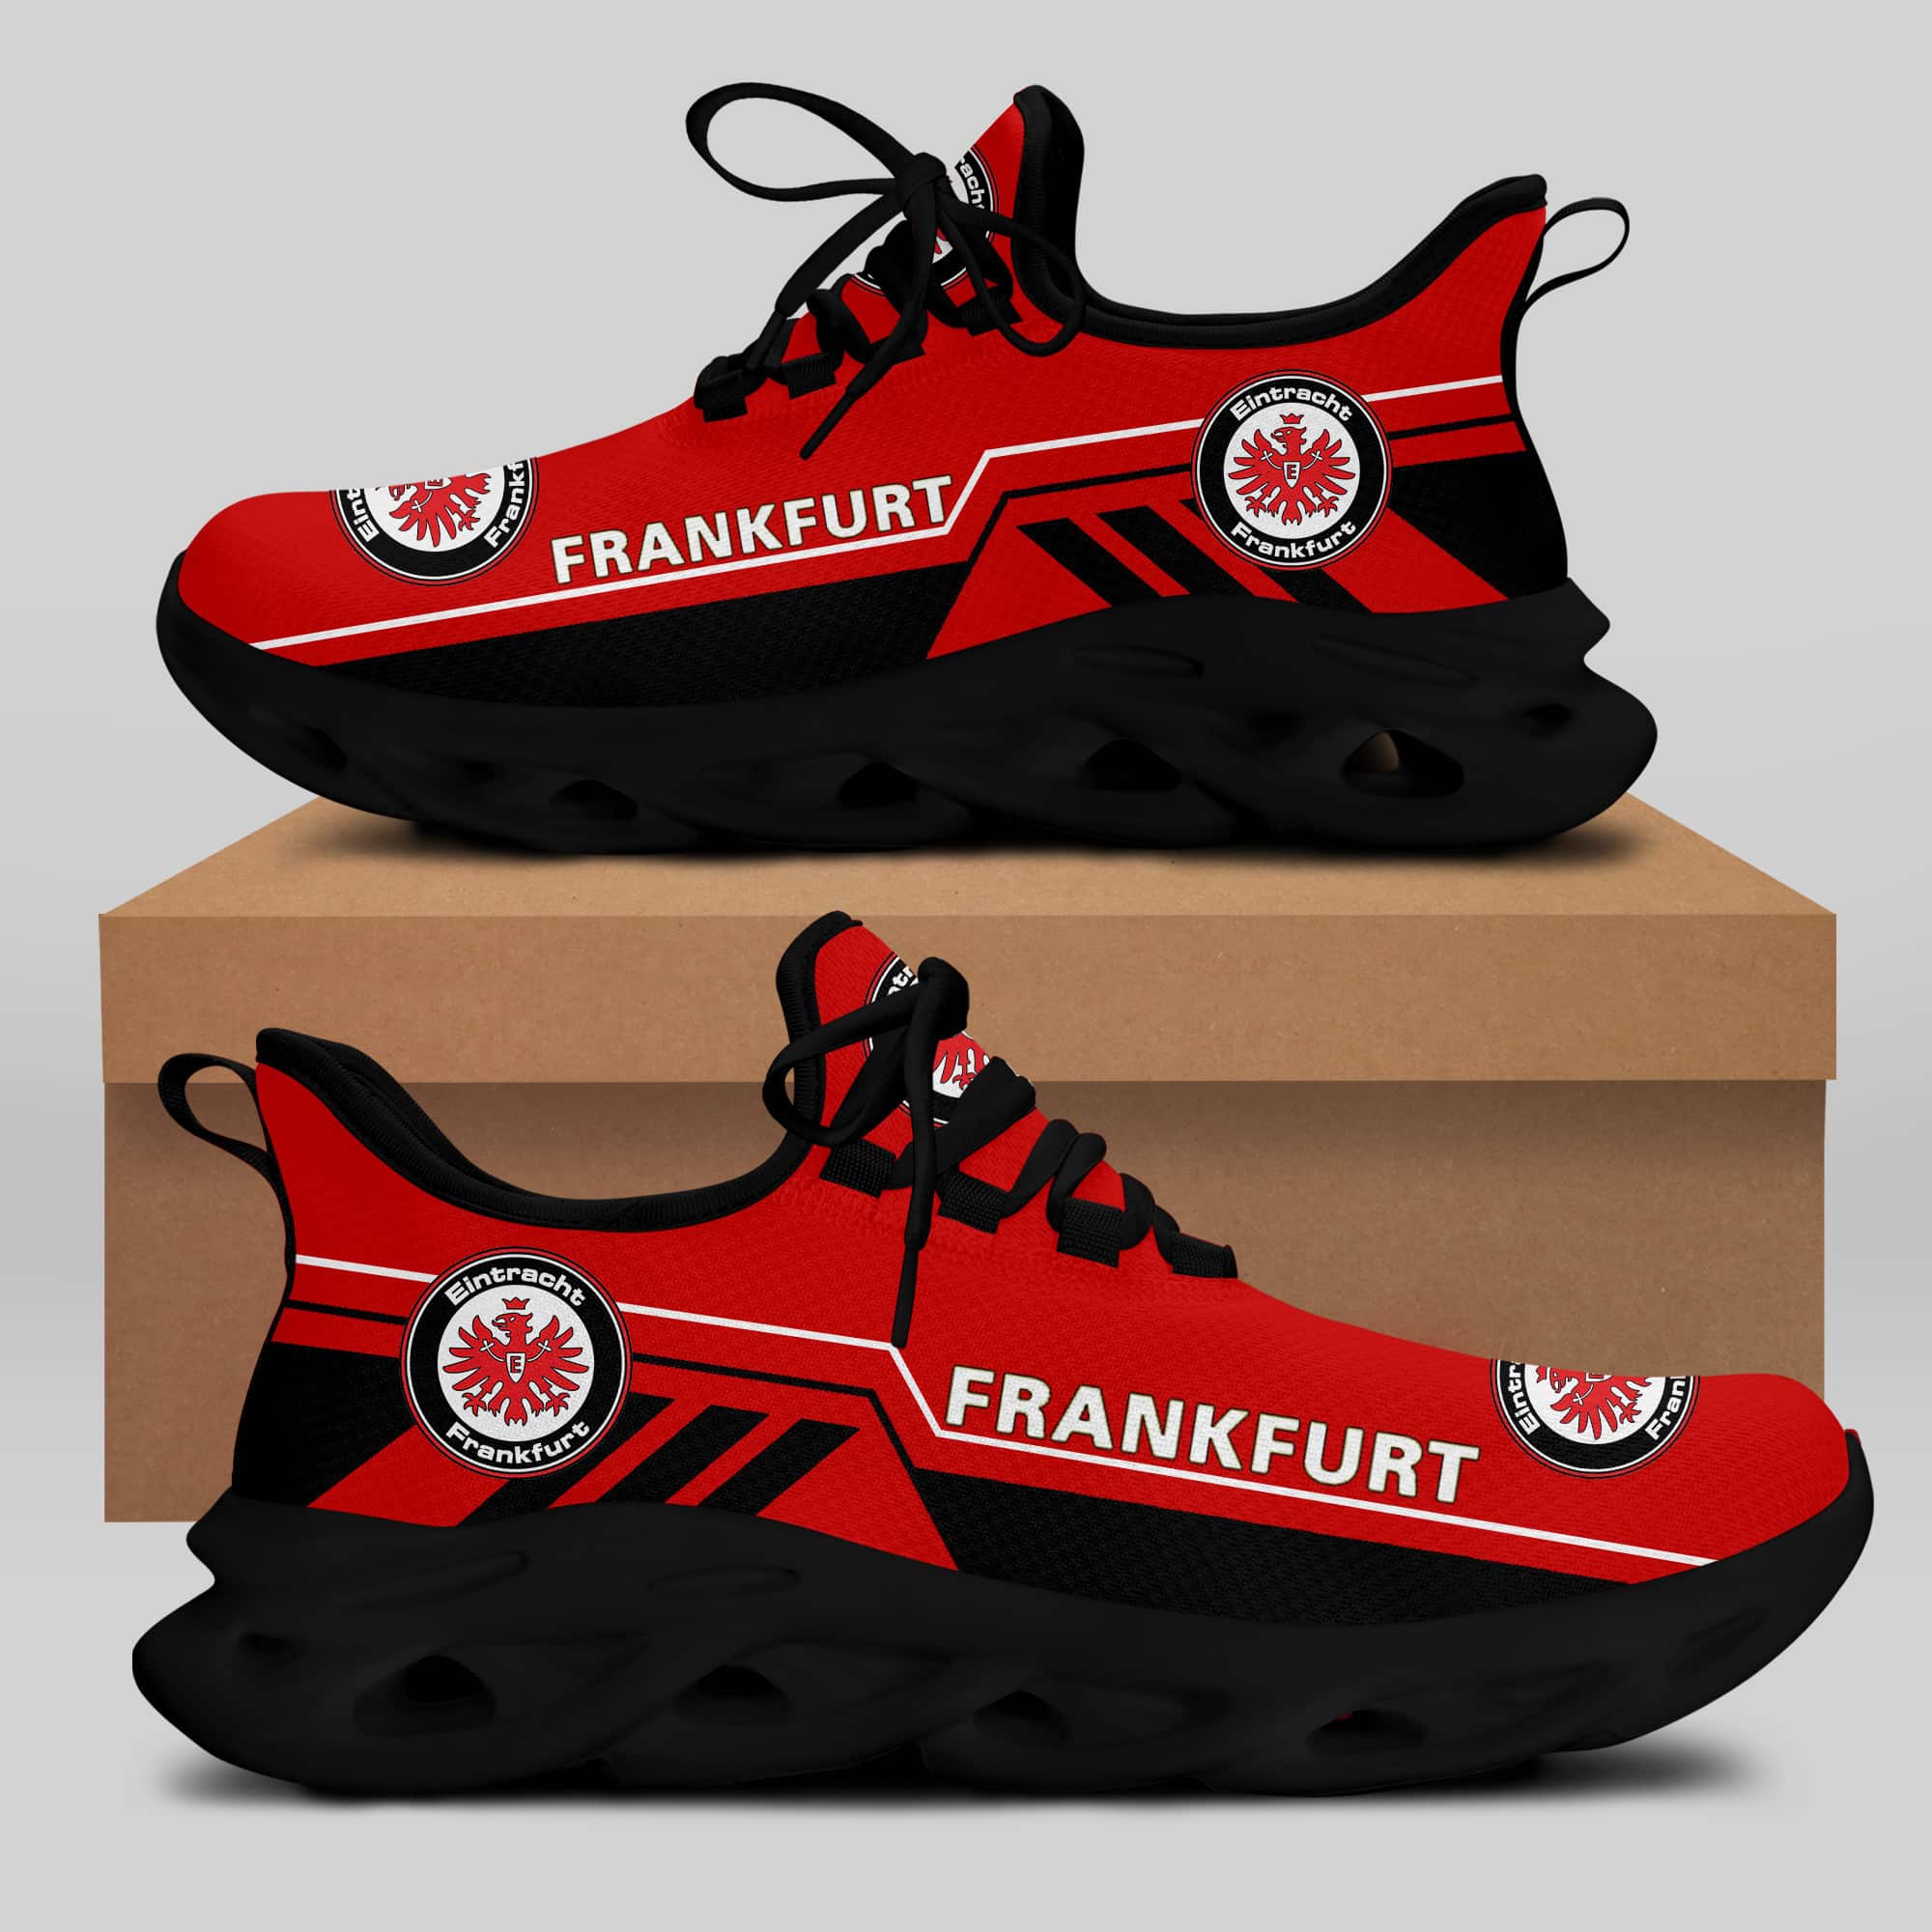 Eintracht Frankfurt Running Shoes Max Soul Shoes Sneakers Ver 13 1